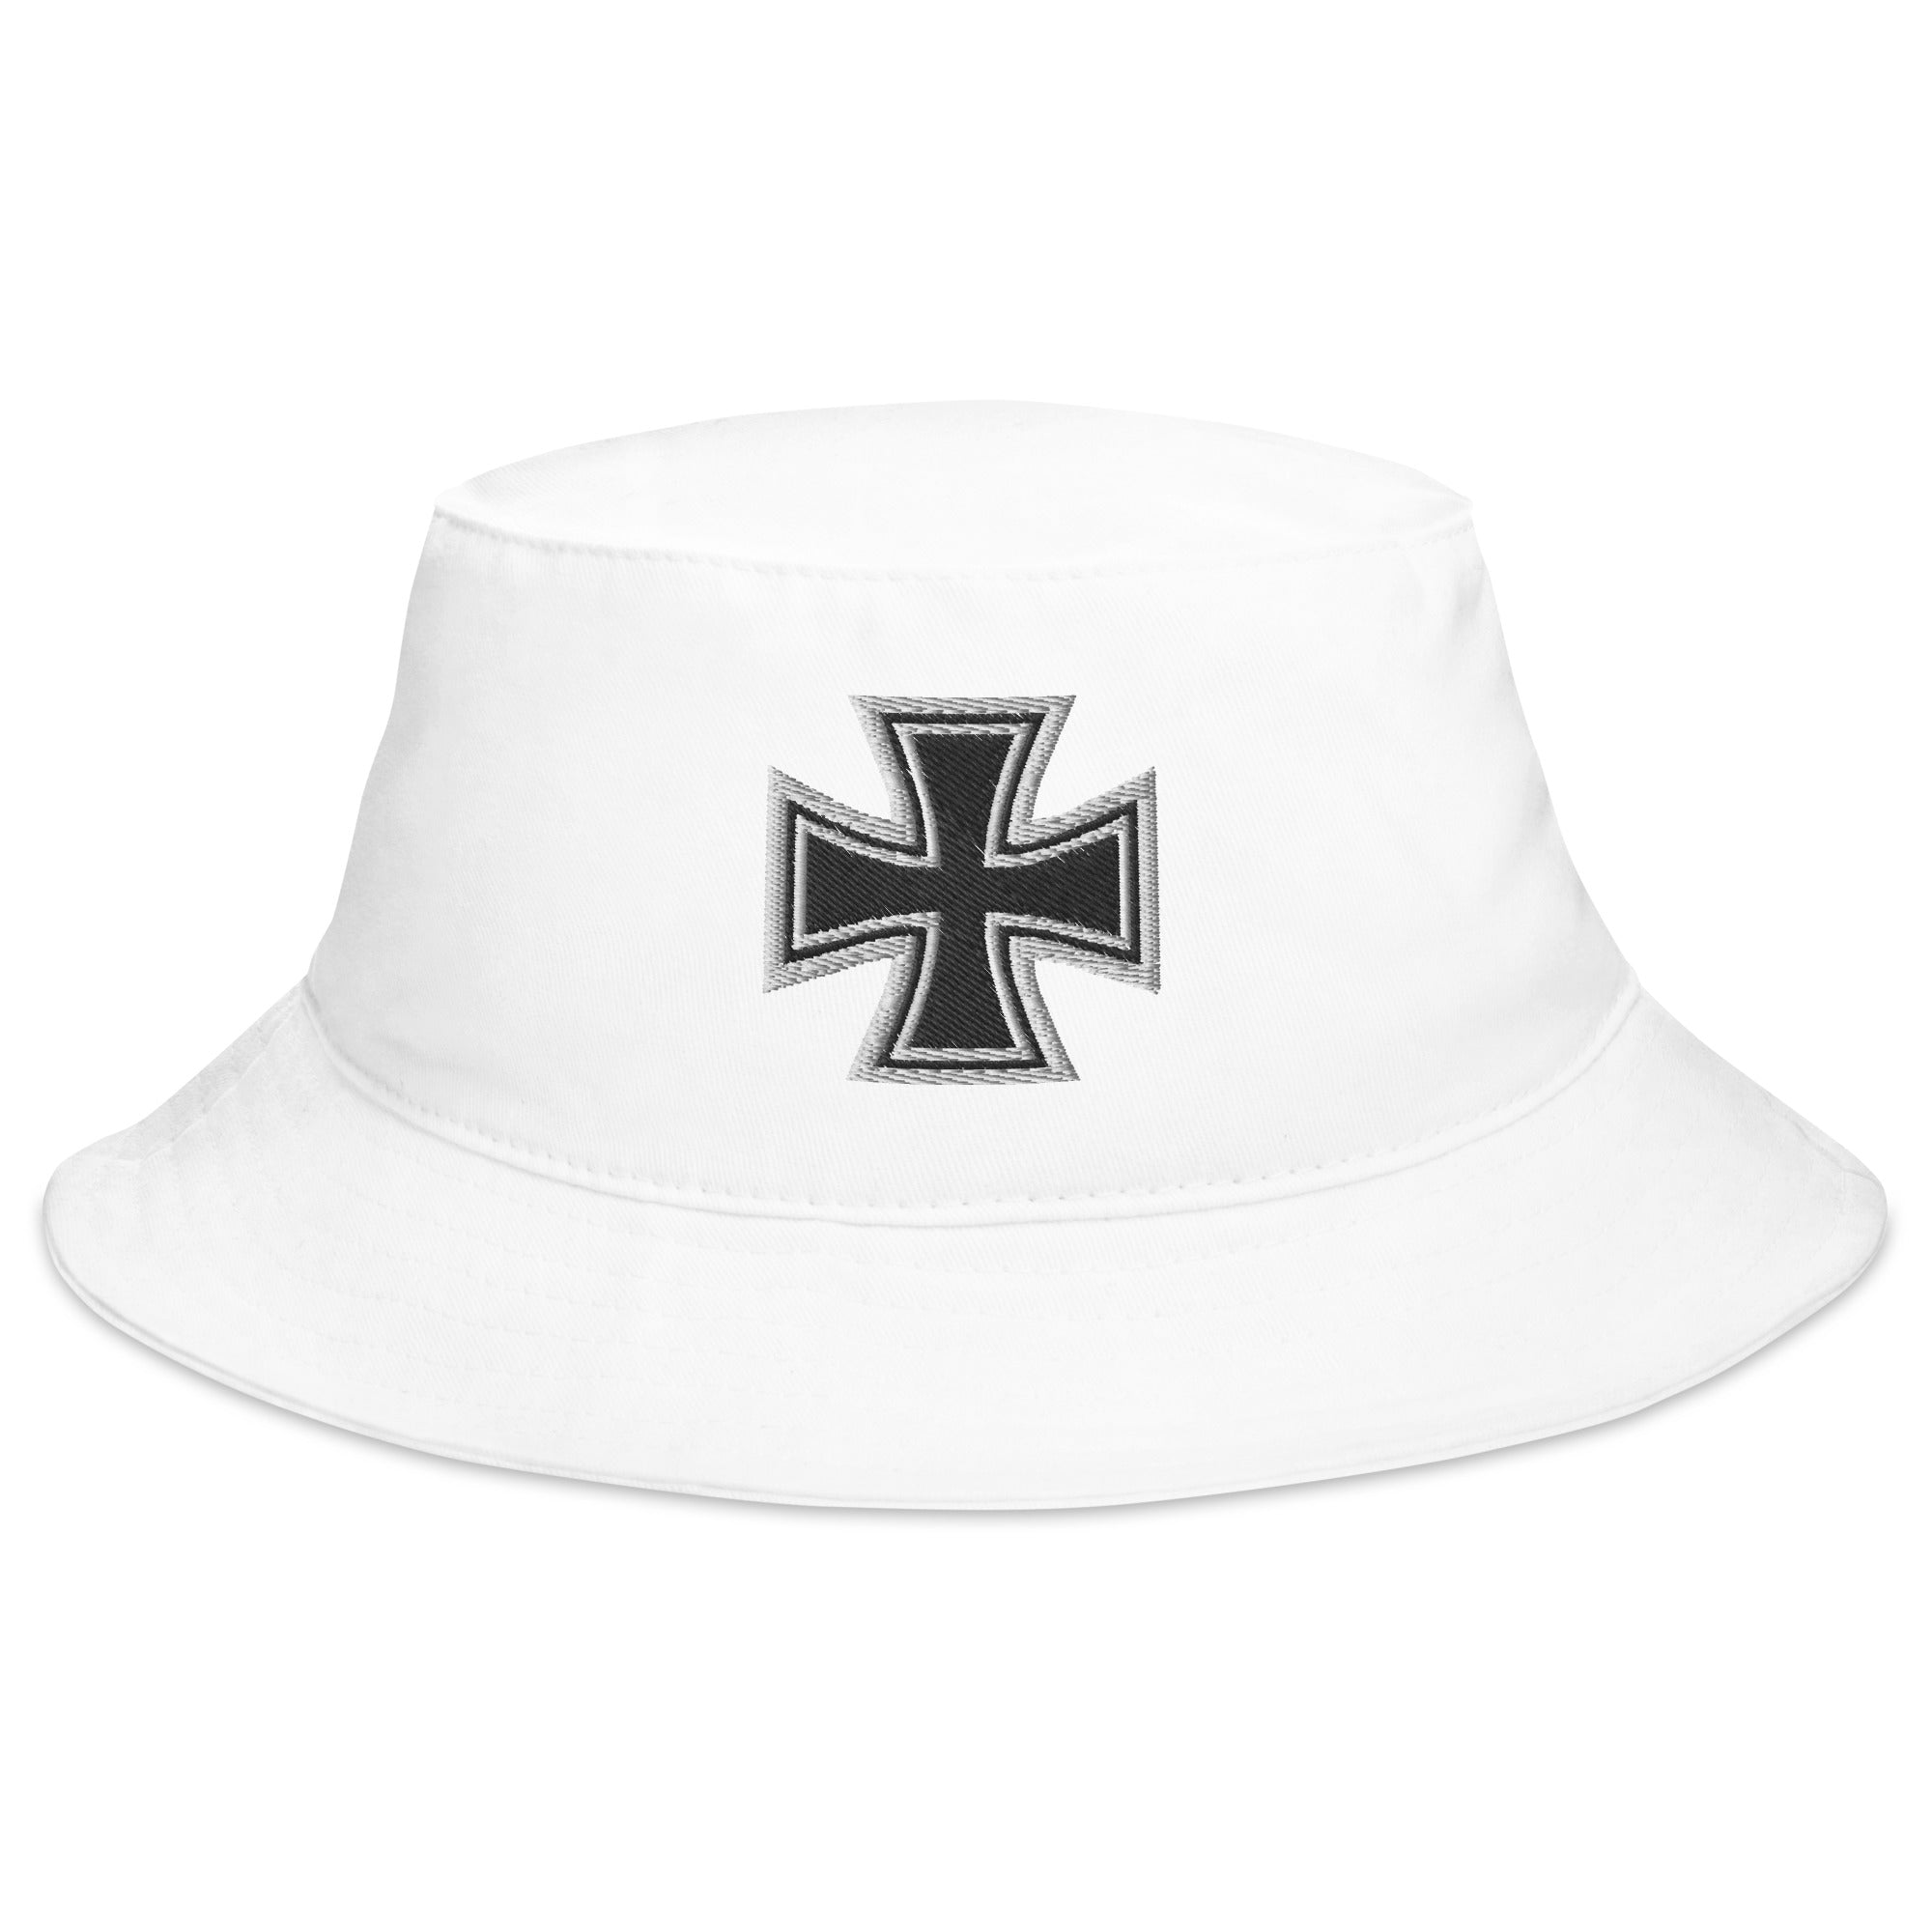 Iron Cross Occult Symbol World War II Style Embroidered Bucket Hat